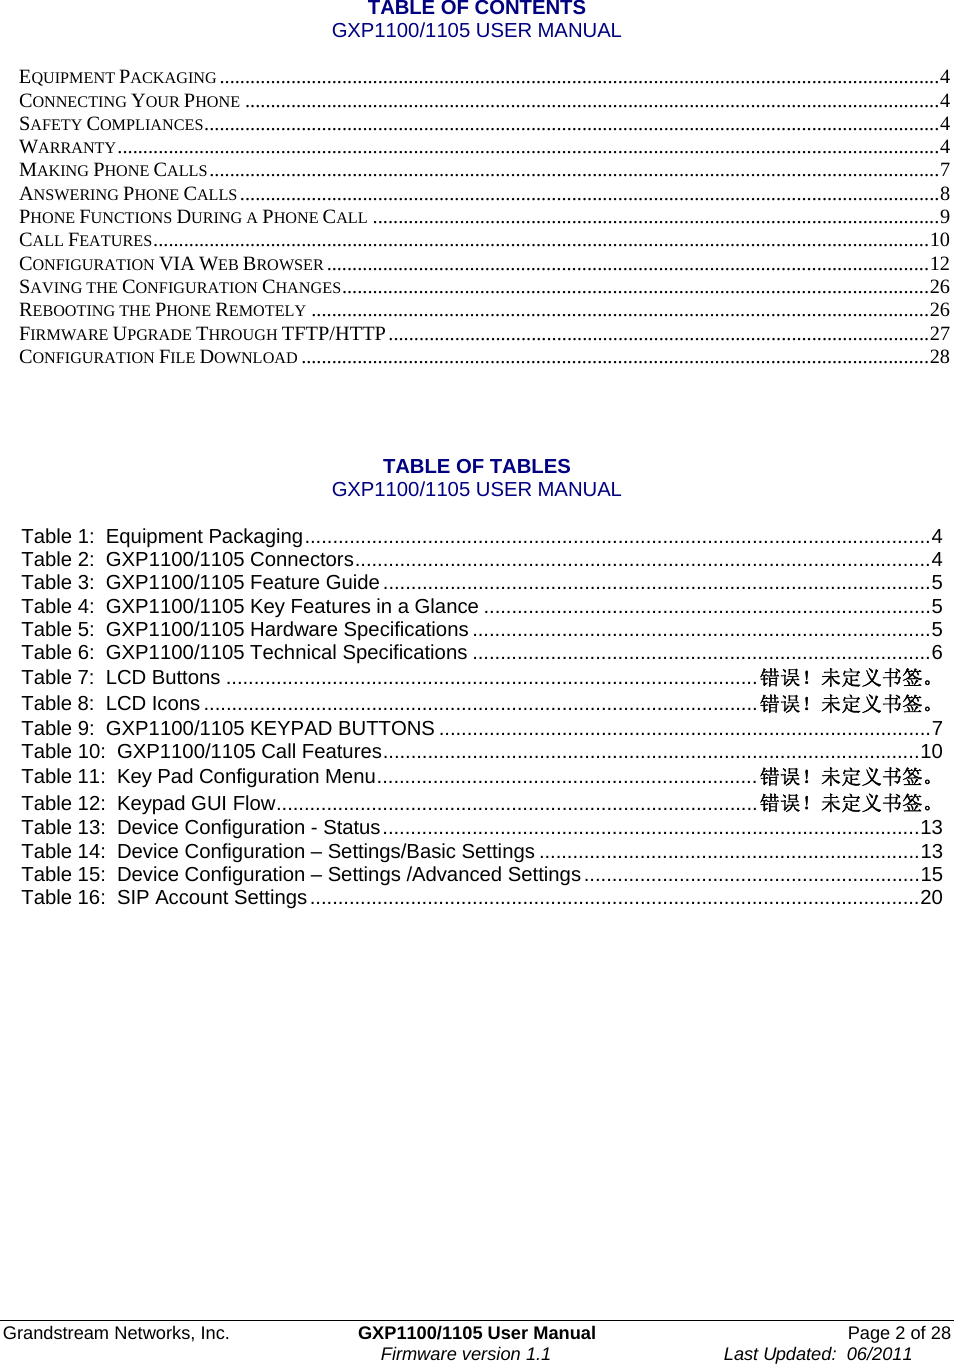 Grandstream Networks, Inc.  GXP1100/1105 User Manual  Page 2 of 28                                                                     Firmware version 1.1                                  Last Updated:  06/2011  TABLE OF CONTENTS  GXP1100/1105 USER MANUAL  EQUIPMENT PACKAGING .............................................................................................................................................4 CONNECTING YOUR PHONE ........................................................................................................................................4 SAFETY COMPLIANCES................................................................................................................................................4 WARRANTY.................................................................................................................................................................4 MAKING PHONE CALLS...............................................................................................................................................7 ANSWERING PHONE CALLS .........................................................................................................................................8 PHONE FUNCTIONS DURING A PHONE CALL ...............................................................................................................9 CALL FEATURES........................................................................................................................................................10 CONFIGURATION VIA WEB BROWSER ......................................................................................................................12 SAVING THE CONFIGURATION CHANGES...................................................................................................................26 REBOOTING THE PHONE REMOTELY .........................................................................................................................26 FIRMWARE UPGRADE THROUGH TFTP/HTTP..........................................................................................................27 CONFIGURATION FILE DOWNLOAD ...........................................................................................................................28     TABLE OF TABLES GXP1100/1105 USER MANUAL  Table 1:  Equipment Packaging................................................................................................................4 Table 2:  GXP1100/1105 Connectors.......................................................................................................4 Table 3:  GXP1100/1105 Feature Guide ..................................................................................................5 Table 4:  GXP1100/1105 Key Features in a Glance ................................................................................5 Table 5:  GXP1100/1105 Hardware Specifications ..................................................................................5 Table 6:  GXP1100/1105 Technical Specifications ..................................................................................6 Table 7:  LCD Buttons ...............................................................................................错误！未定义书签。 Table 8:  LCD Icons...................................................................................................错误！未定义书签。 Table 9:  GXP1100/1105 KEYPAD BUTTONS ........................................................................................7 Table 10:  GXP1100/1105 Call Features................................................................................................10 Table 11:  Key Pad Configuration Menu....................................................................错误！未定义书签。 Table 12:  Keypad GUI Flow......................................................................................错误！未定义书签。 Table 13:  Device Configuration - Status................................................................................................13 Table 14:  Device Configuration – Settings/Basic Settings ....................................................................13 Table 15:  Device Configuration – Settings /Advanced Settings............................................................15 Table 16:  SIP Account Settings.............................................................................................................20  